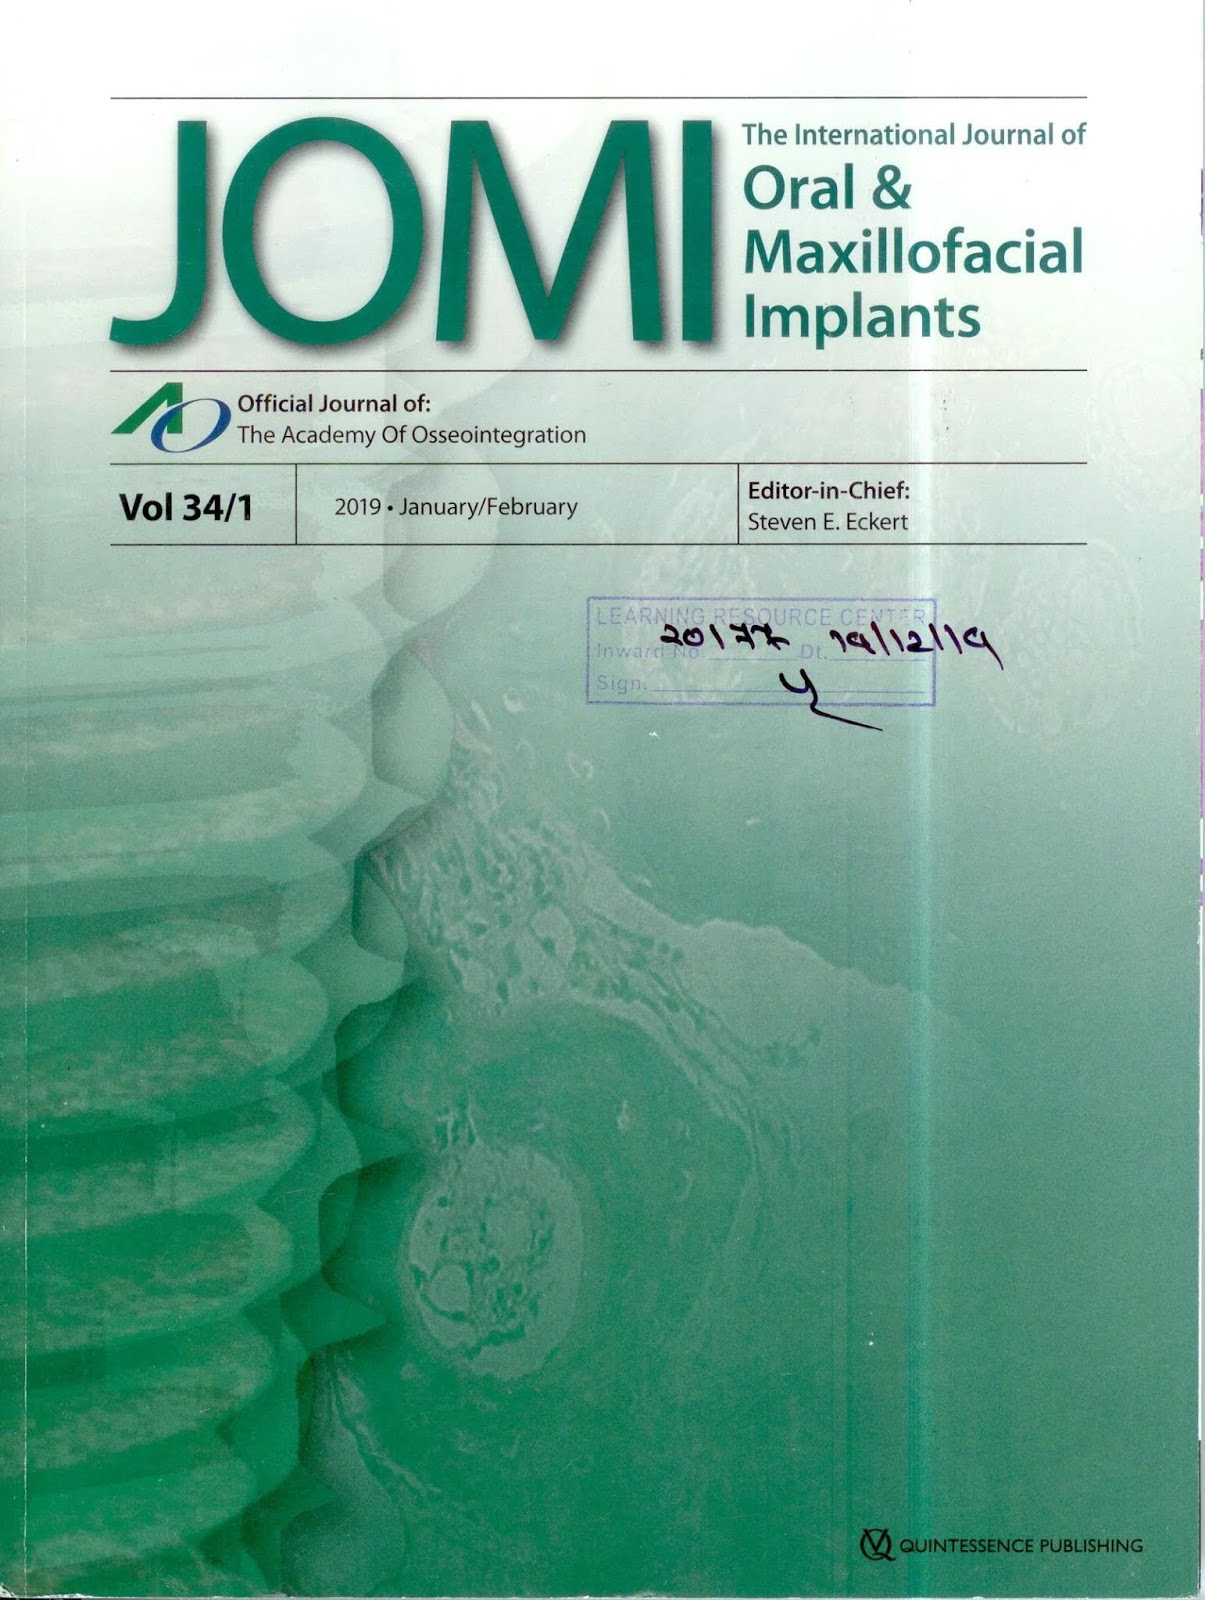 http://www.quintpub.com/journals/omi/journal_contents.php?iss_id=1584&journal_name=OMI&vol_year=2019&vol_num=34#.XfySJLiduyA